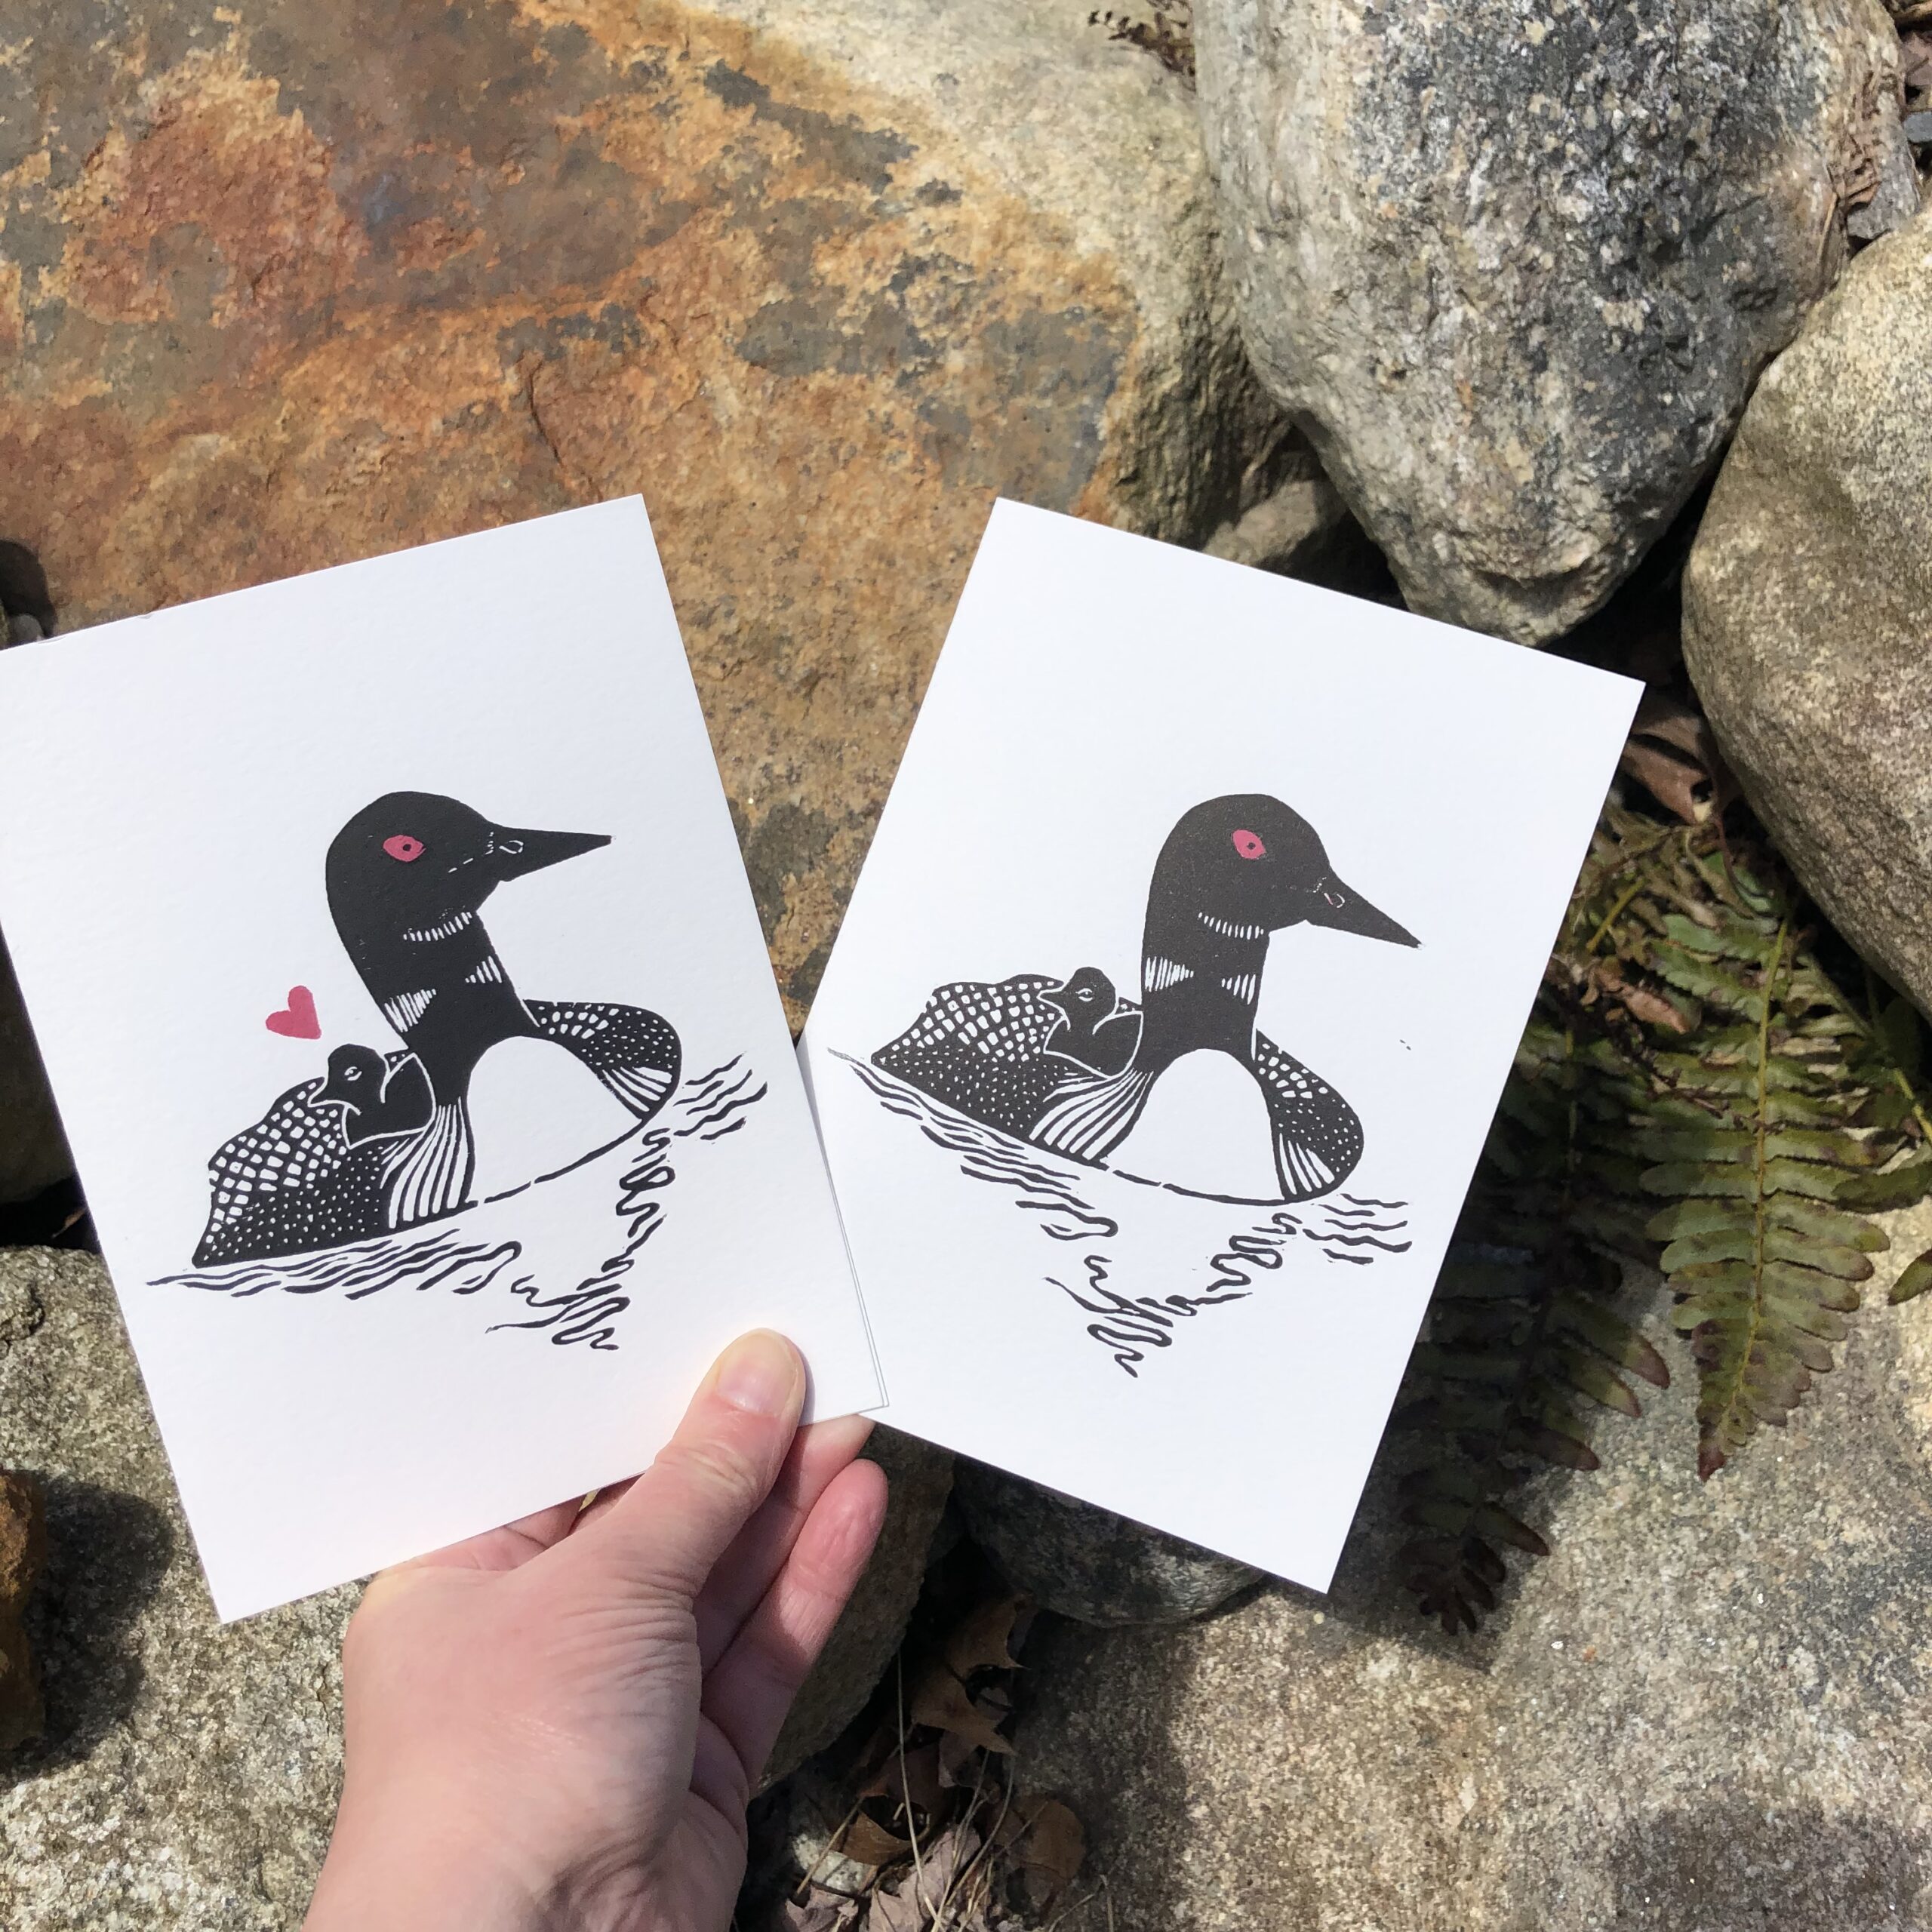 Two white cards, each printed with a black-and-white common loon and chick. The chick rides on its parent’s back. The card on the left also has a small red heart above the chick. Both cards show the adult loon with a red eye.